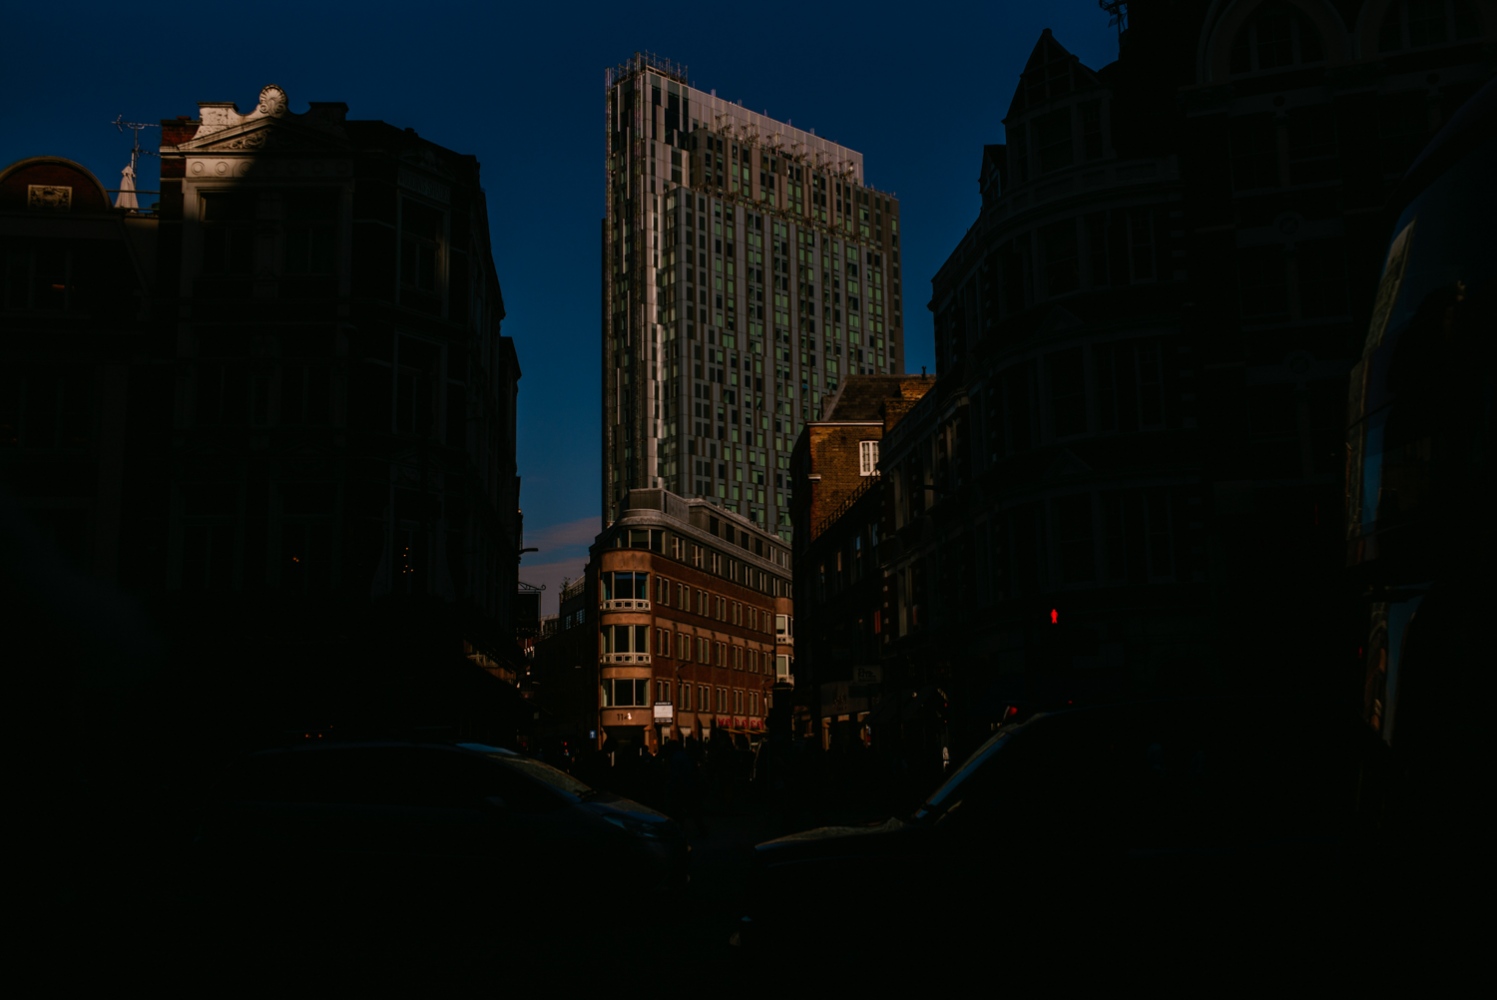 Image from Documenting East London